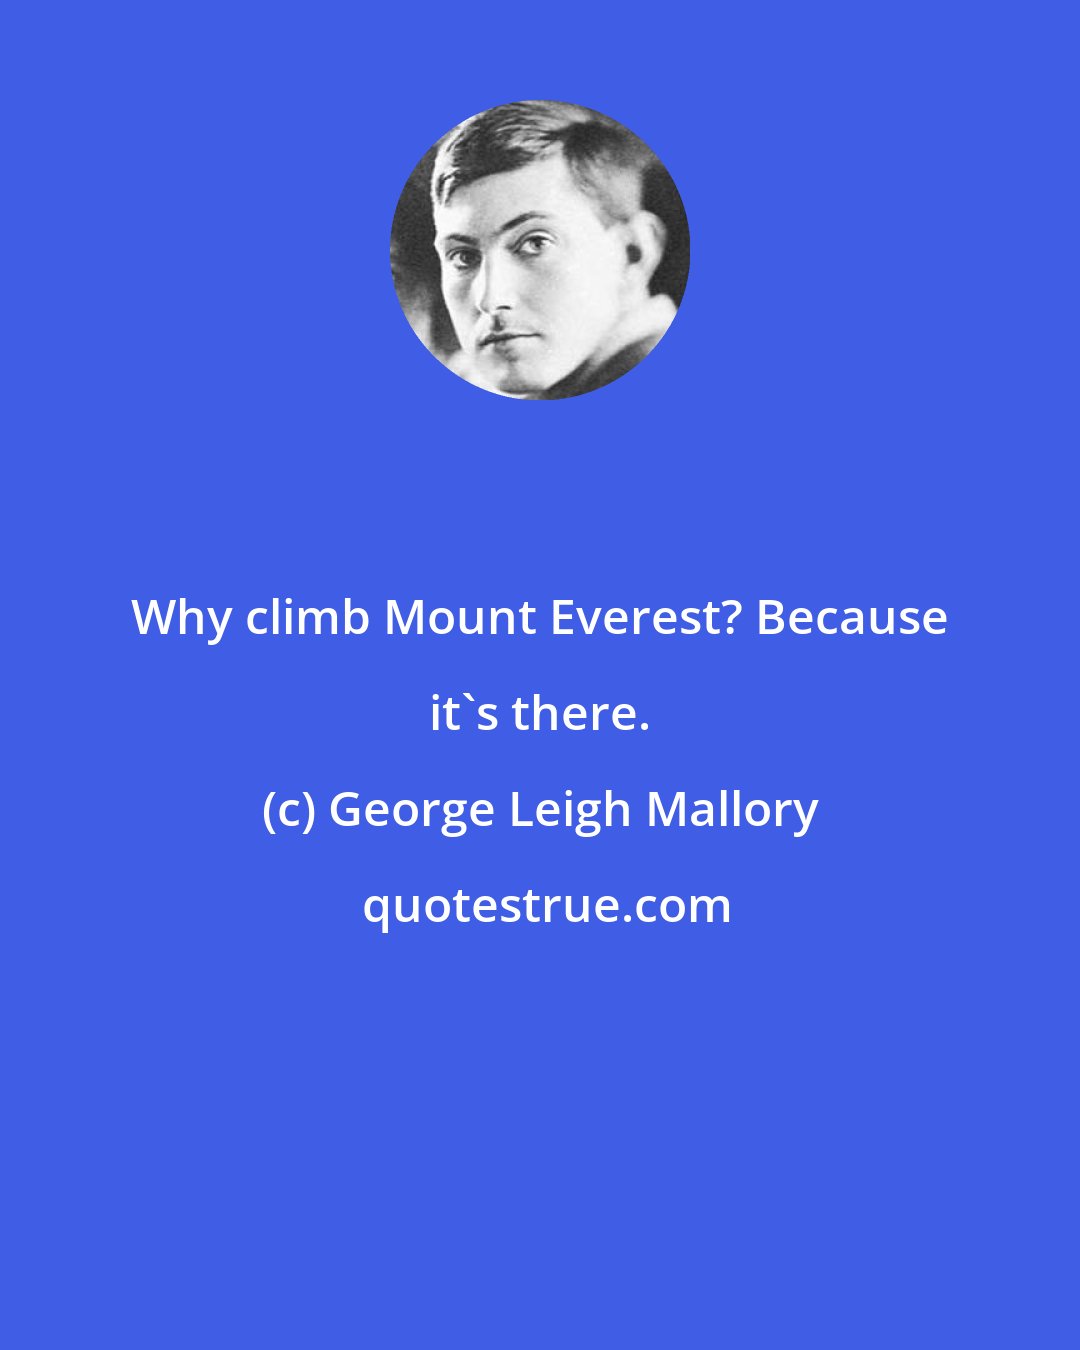 George Leigh Mallory: Why climb Mount Everest? Because it's there.